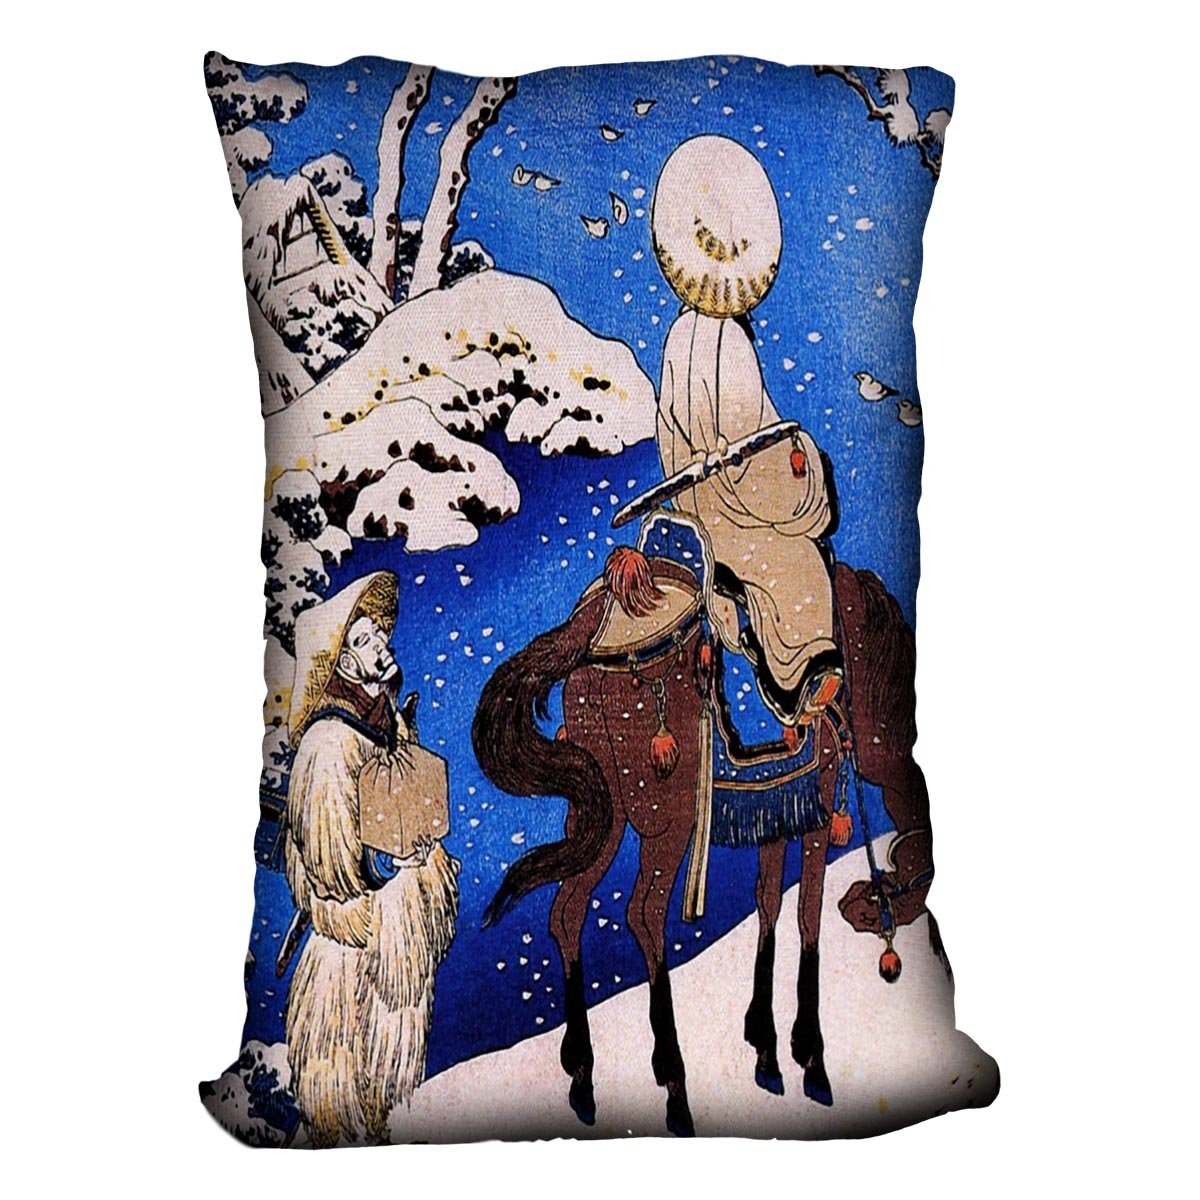 The poet Teba on a horse by Hokusai Throw Pillow